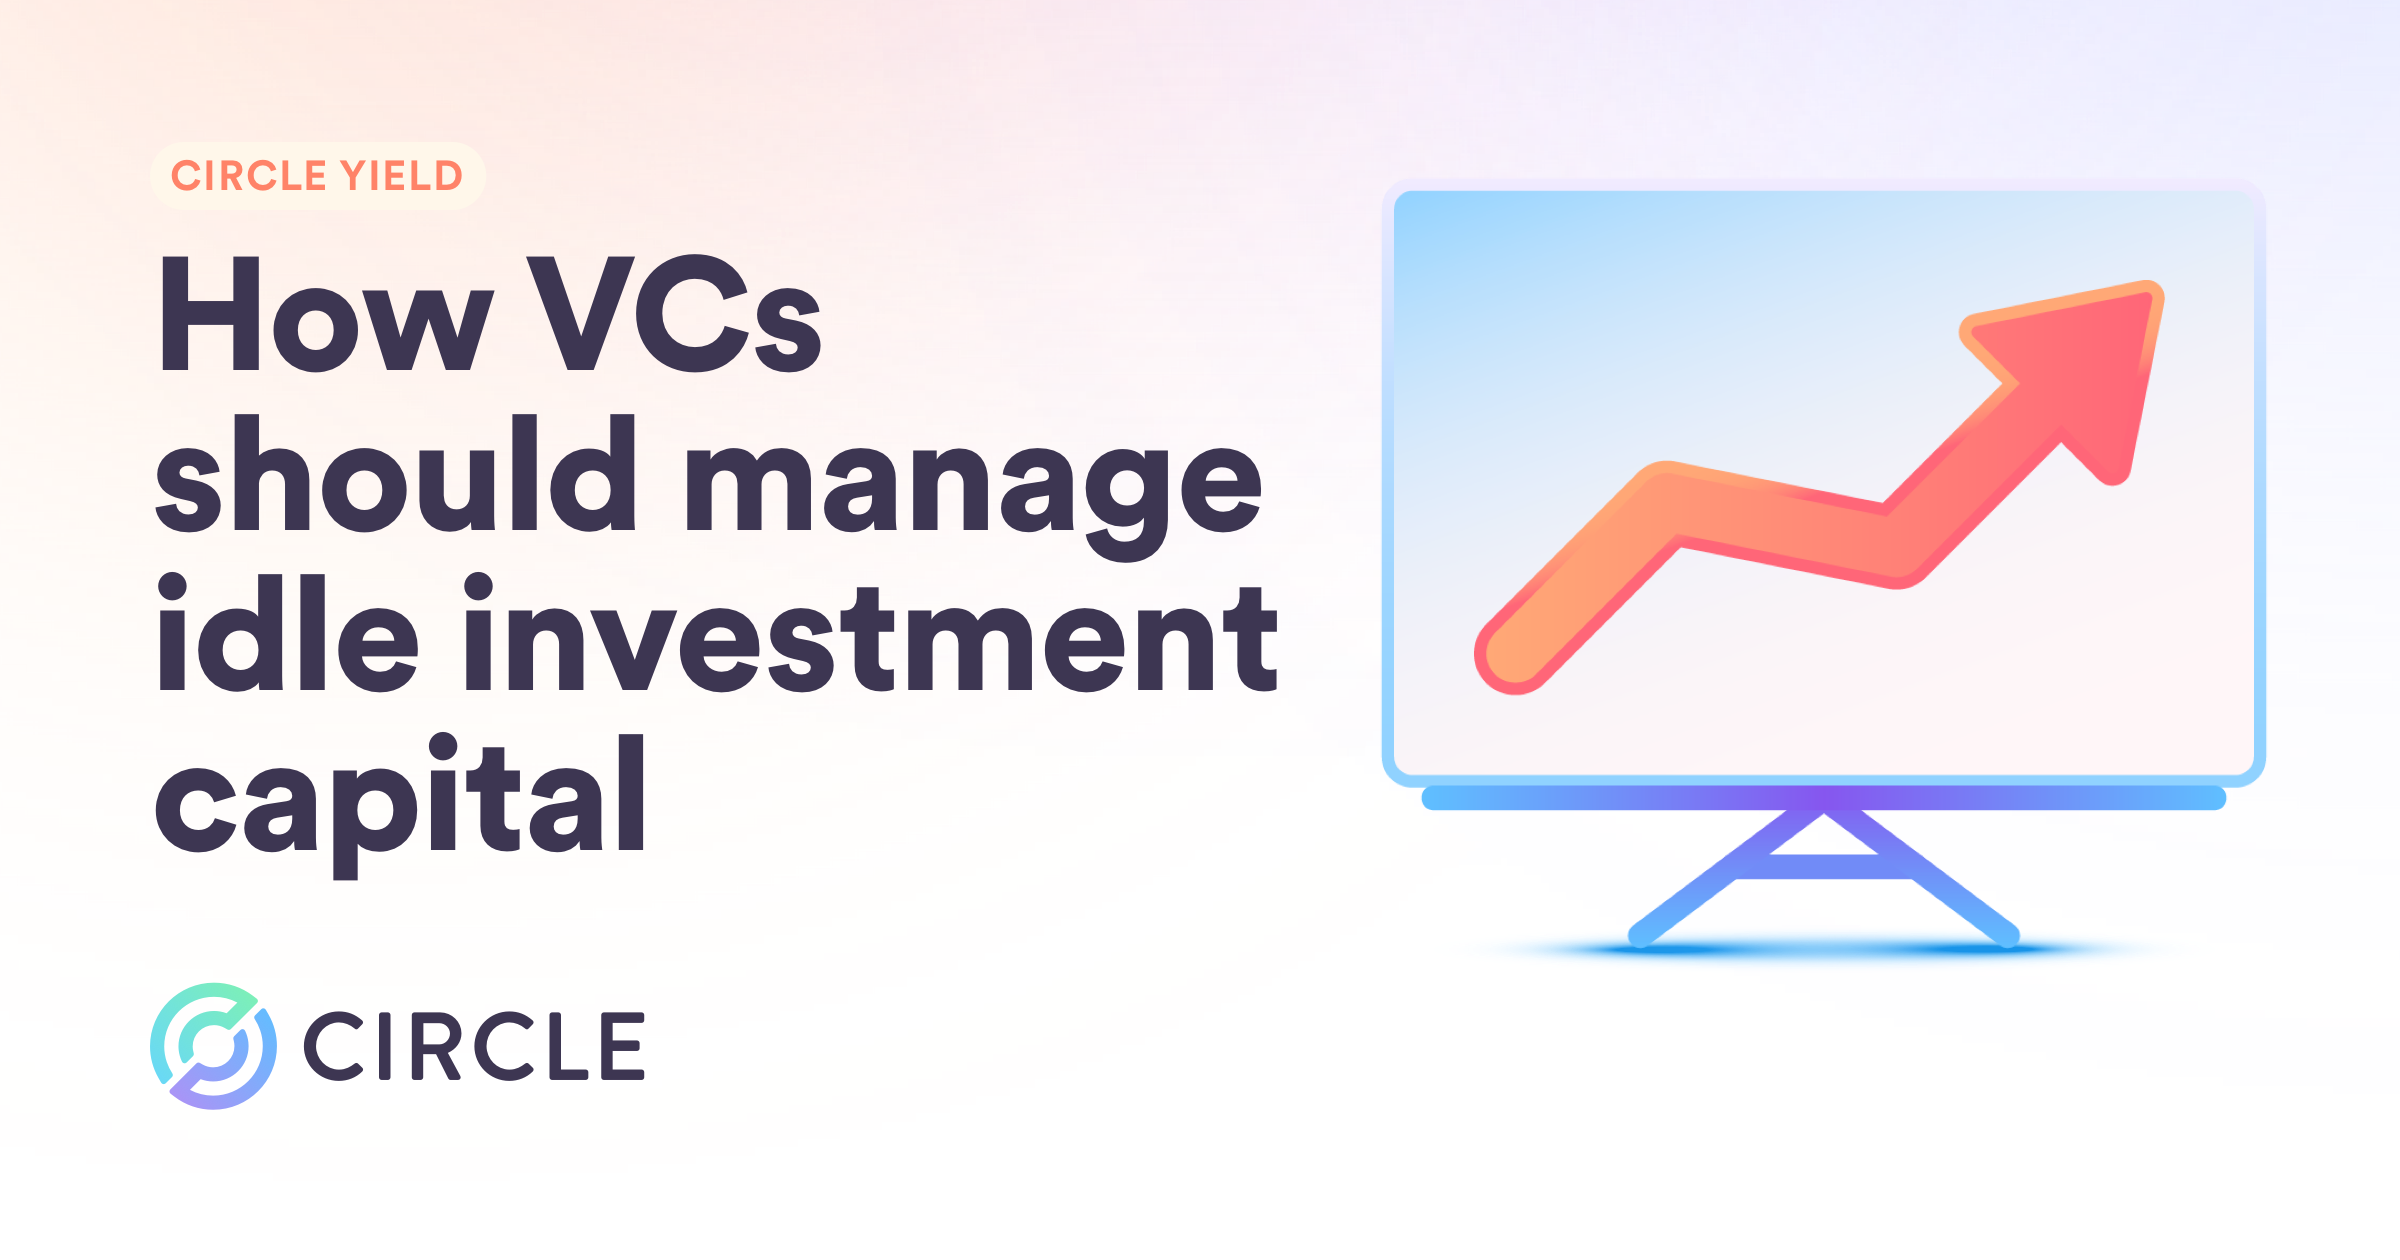 Circle Yield, a short-term cash investment for Venture Capitalists with above-average yields and flexible terms.